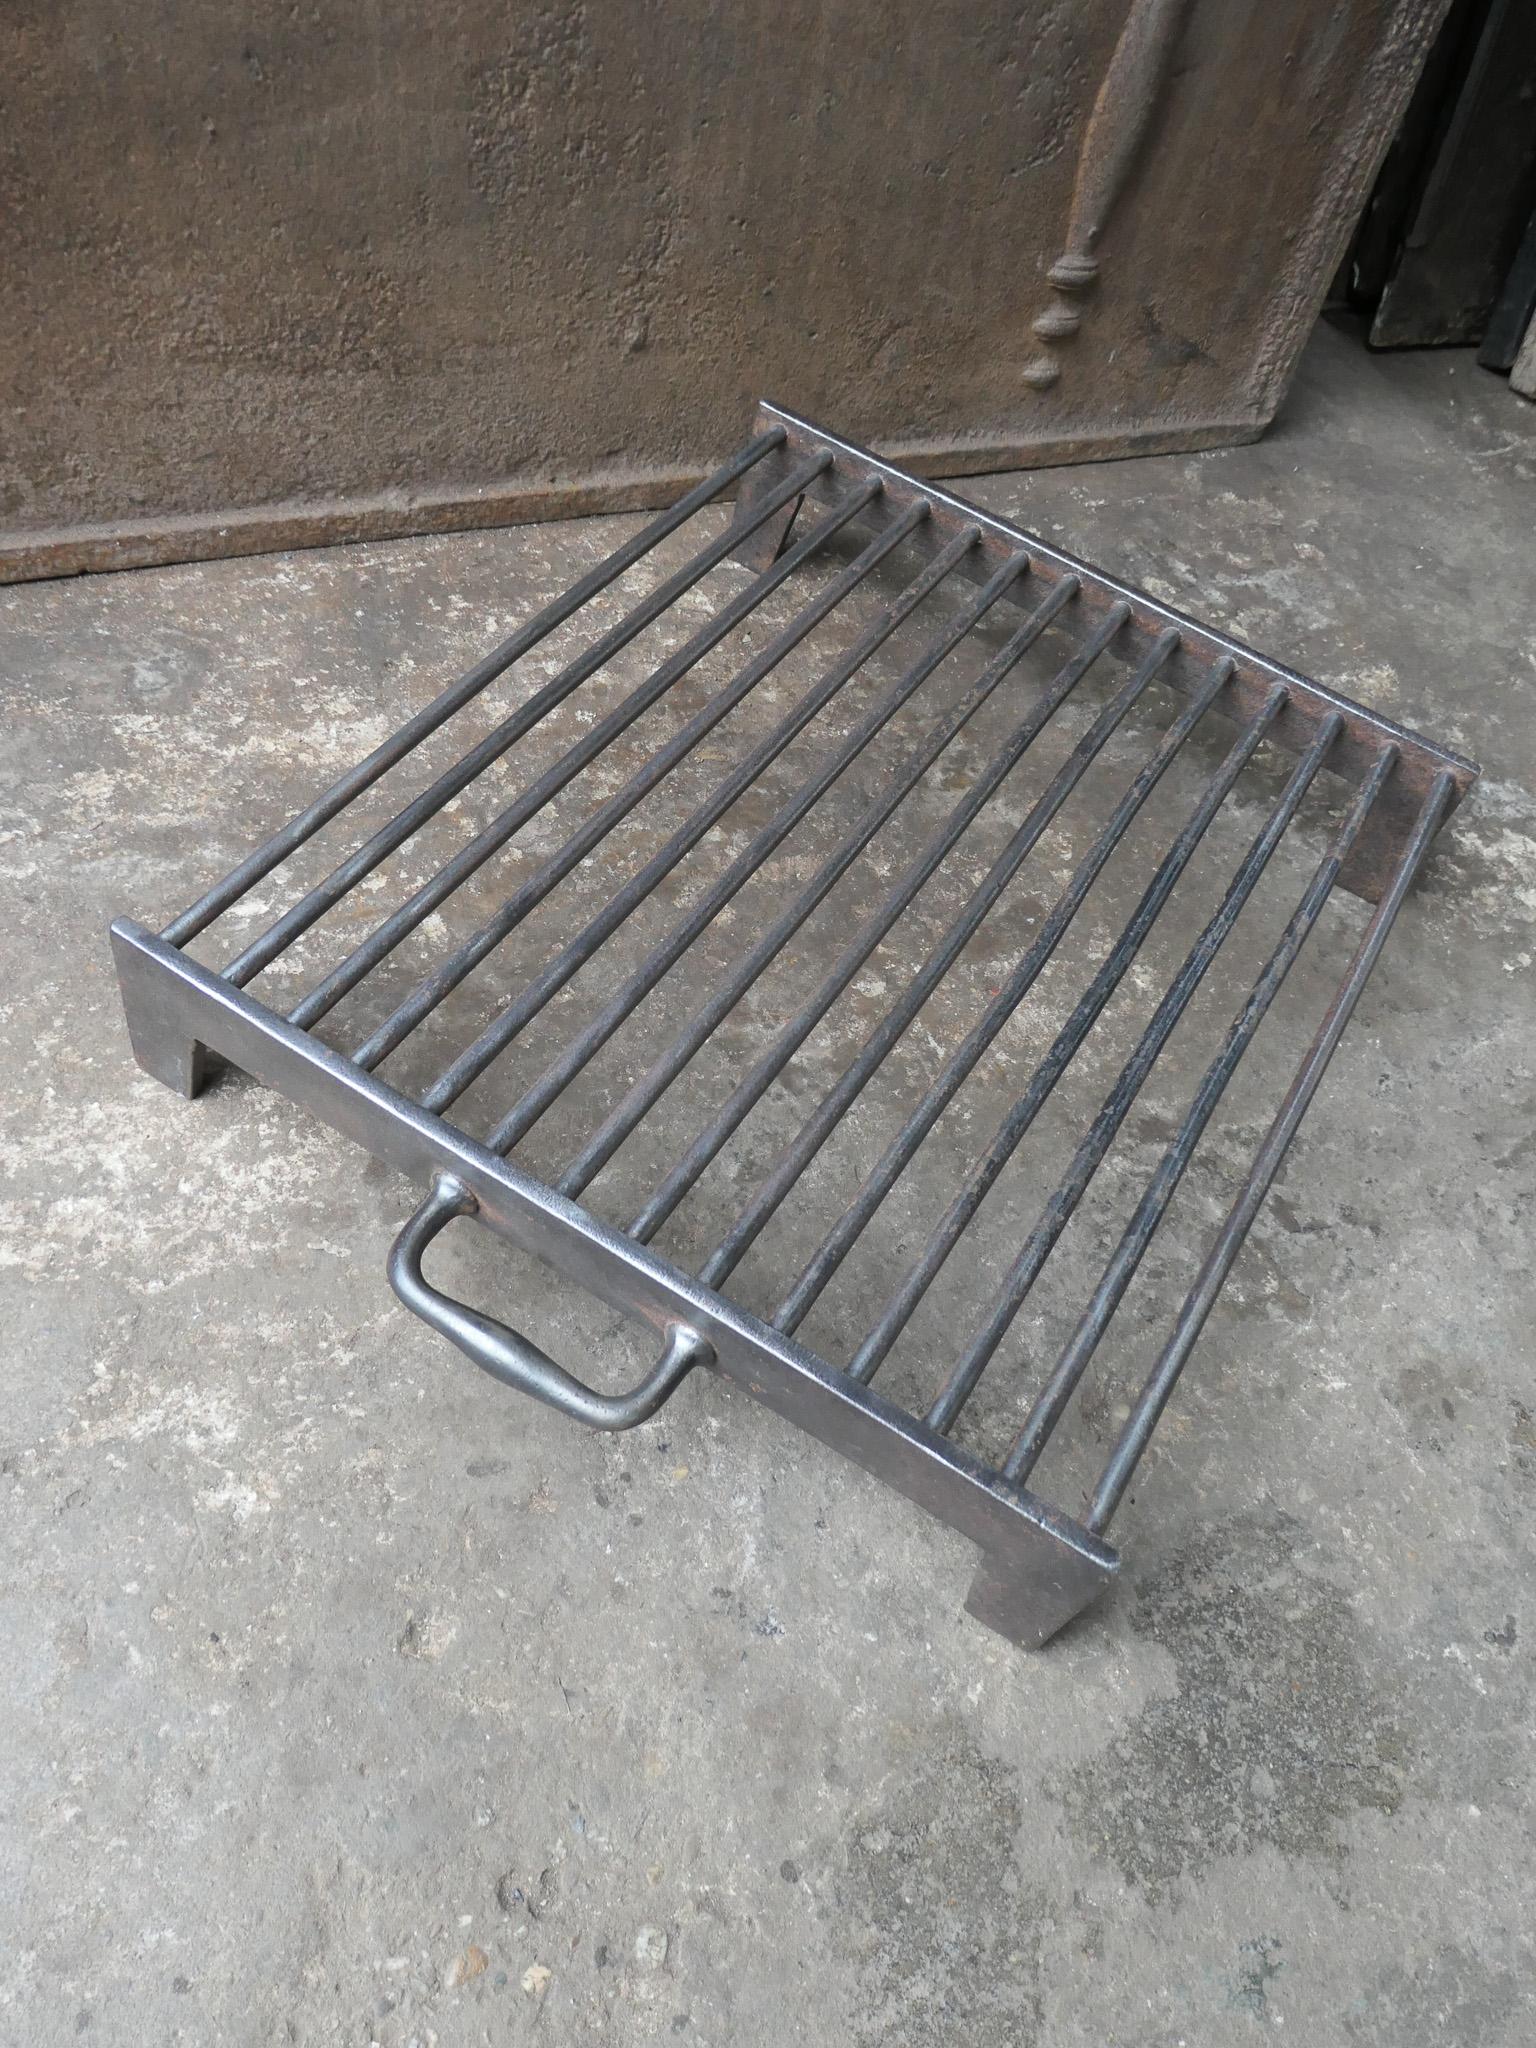 Large 19th century hand forged French gridiron, made of wrought iron. It is used to grill small pieces of meat quickly over the fire. Sometimes they are put in the fire or else on a trivet, depending on the size of the fire. The gridiron is in a